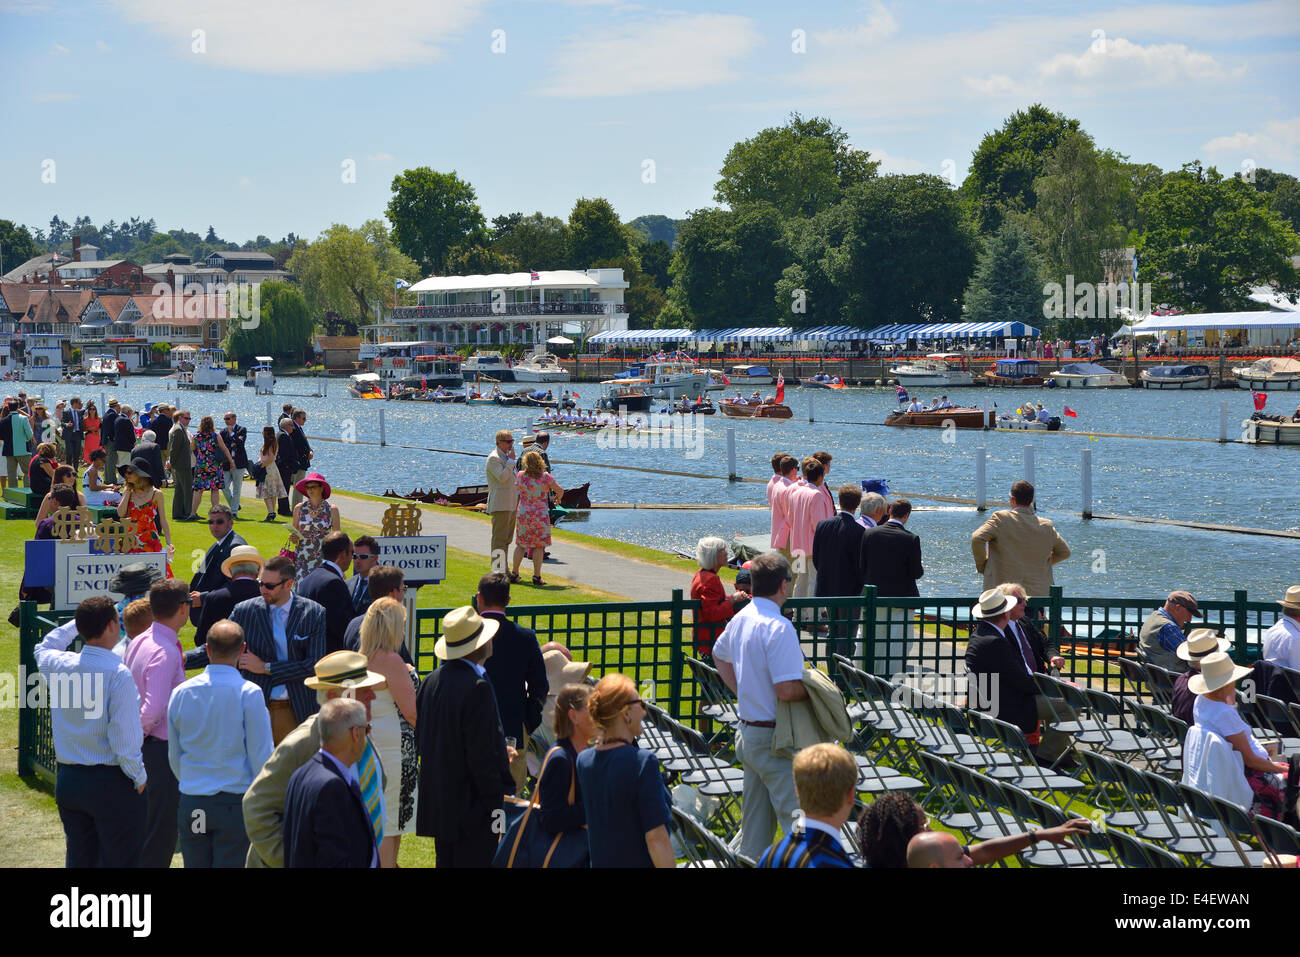 View into the Stewards Enclosure of the crowds attending the rowing regatta at the Henley Royal Regatta, Henley on Thames, Oxfordshire, England,UK Stock Photo